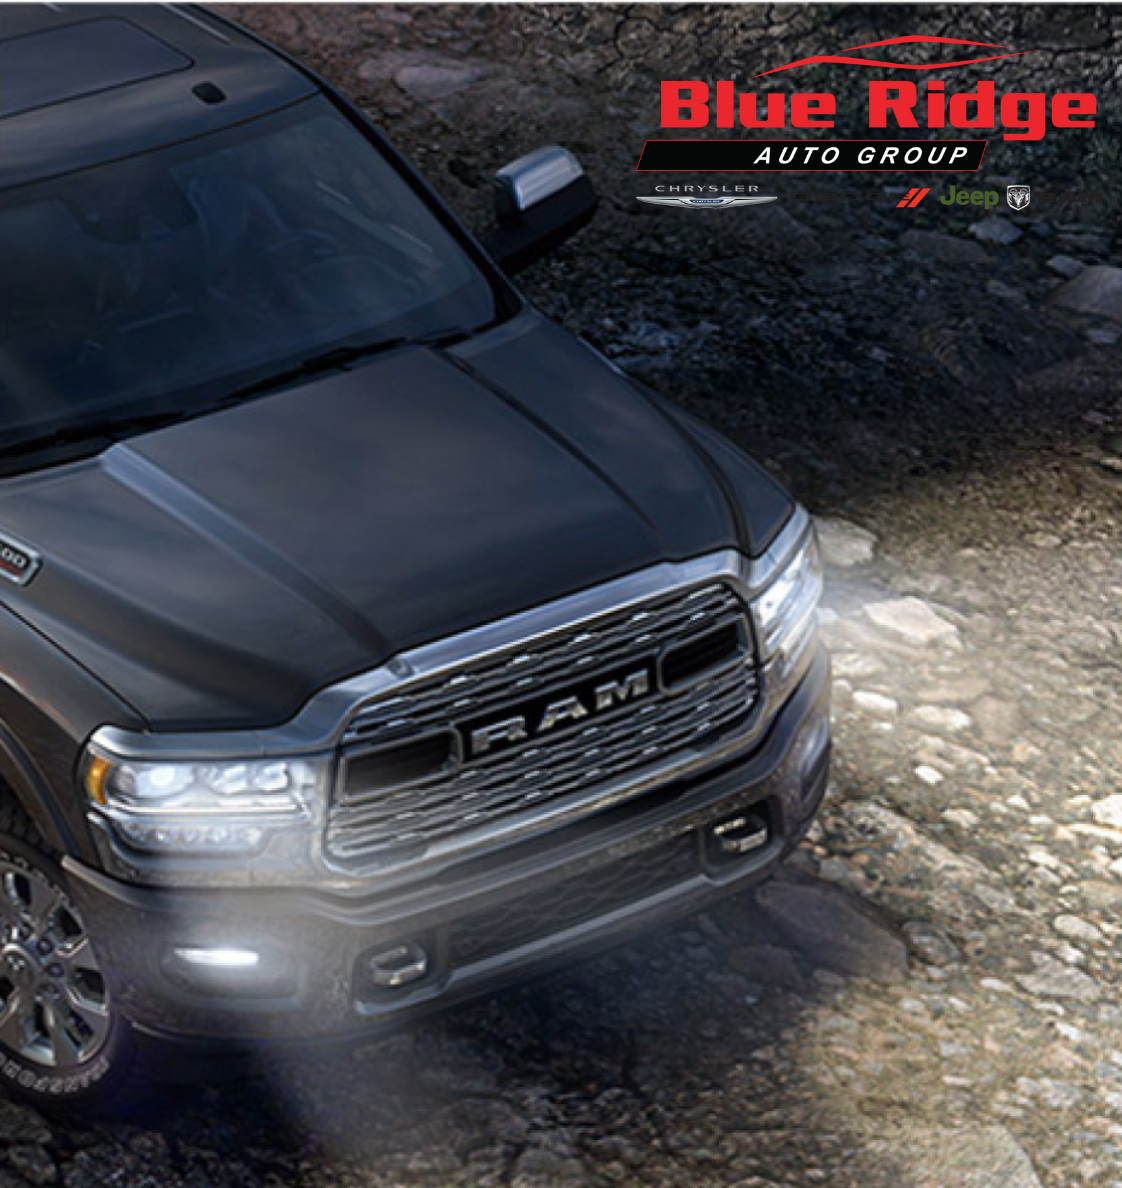 Packed with advanced safety and security features, Ram 3500 gives you the best of power and control. #blueridgecdjr #autodealer #truckshopping #ramtrucks